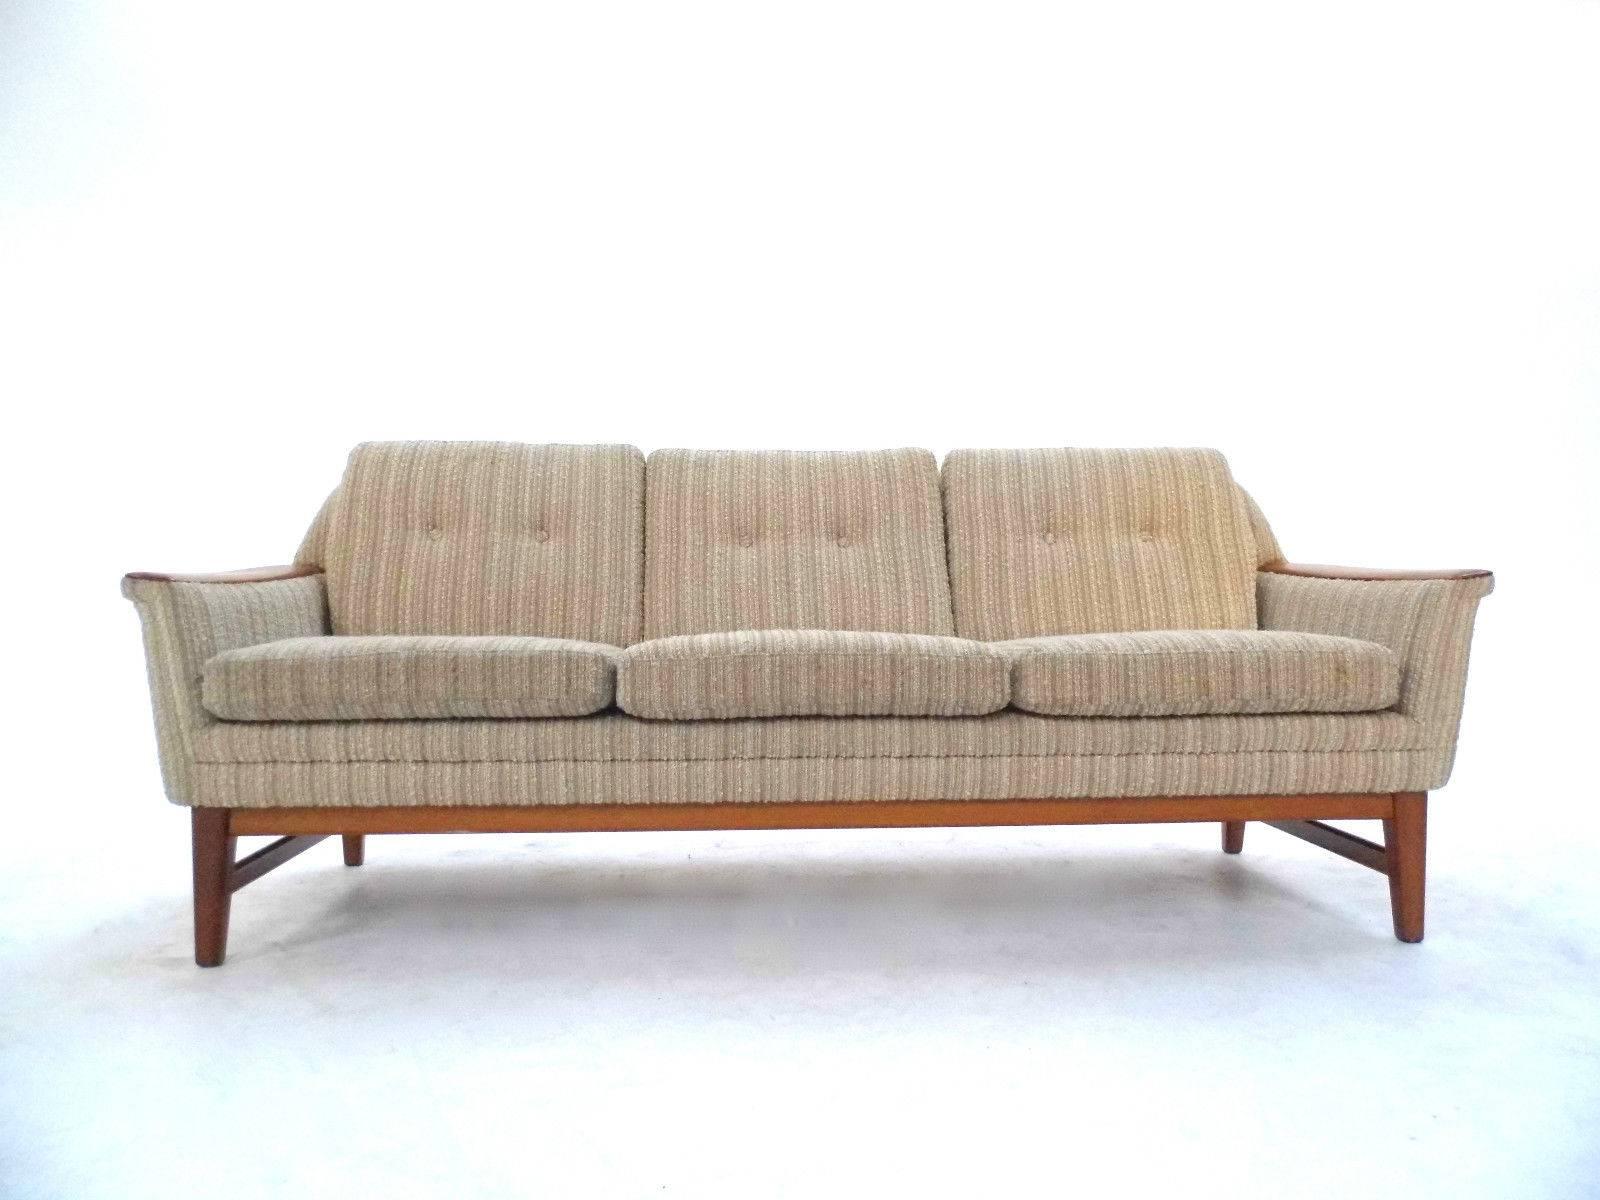 A beautiful Norwegian cream wool three-seat sofa, this would make a stylish addition to any living or work area. The sofa has a buttoned backrest and sculptured teak arms for enhanced comfort. A striking piece of classically designed Scandinavian